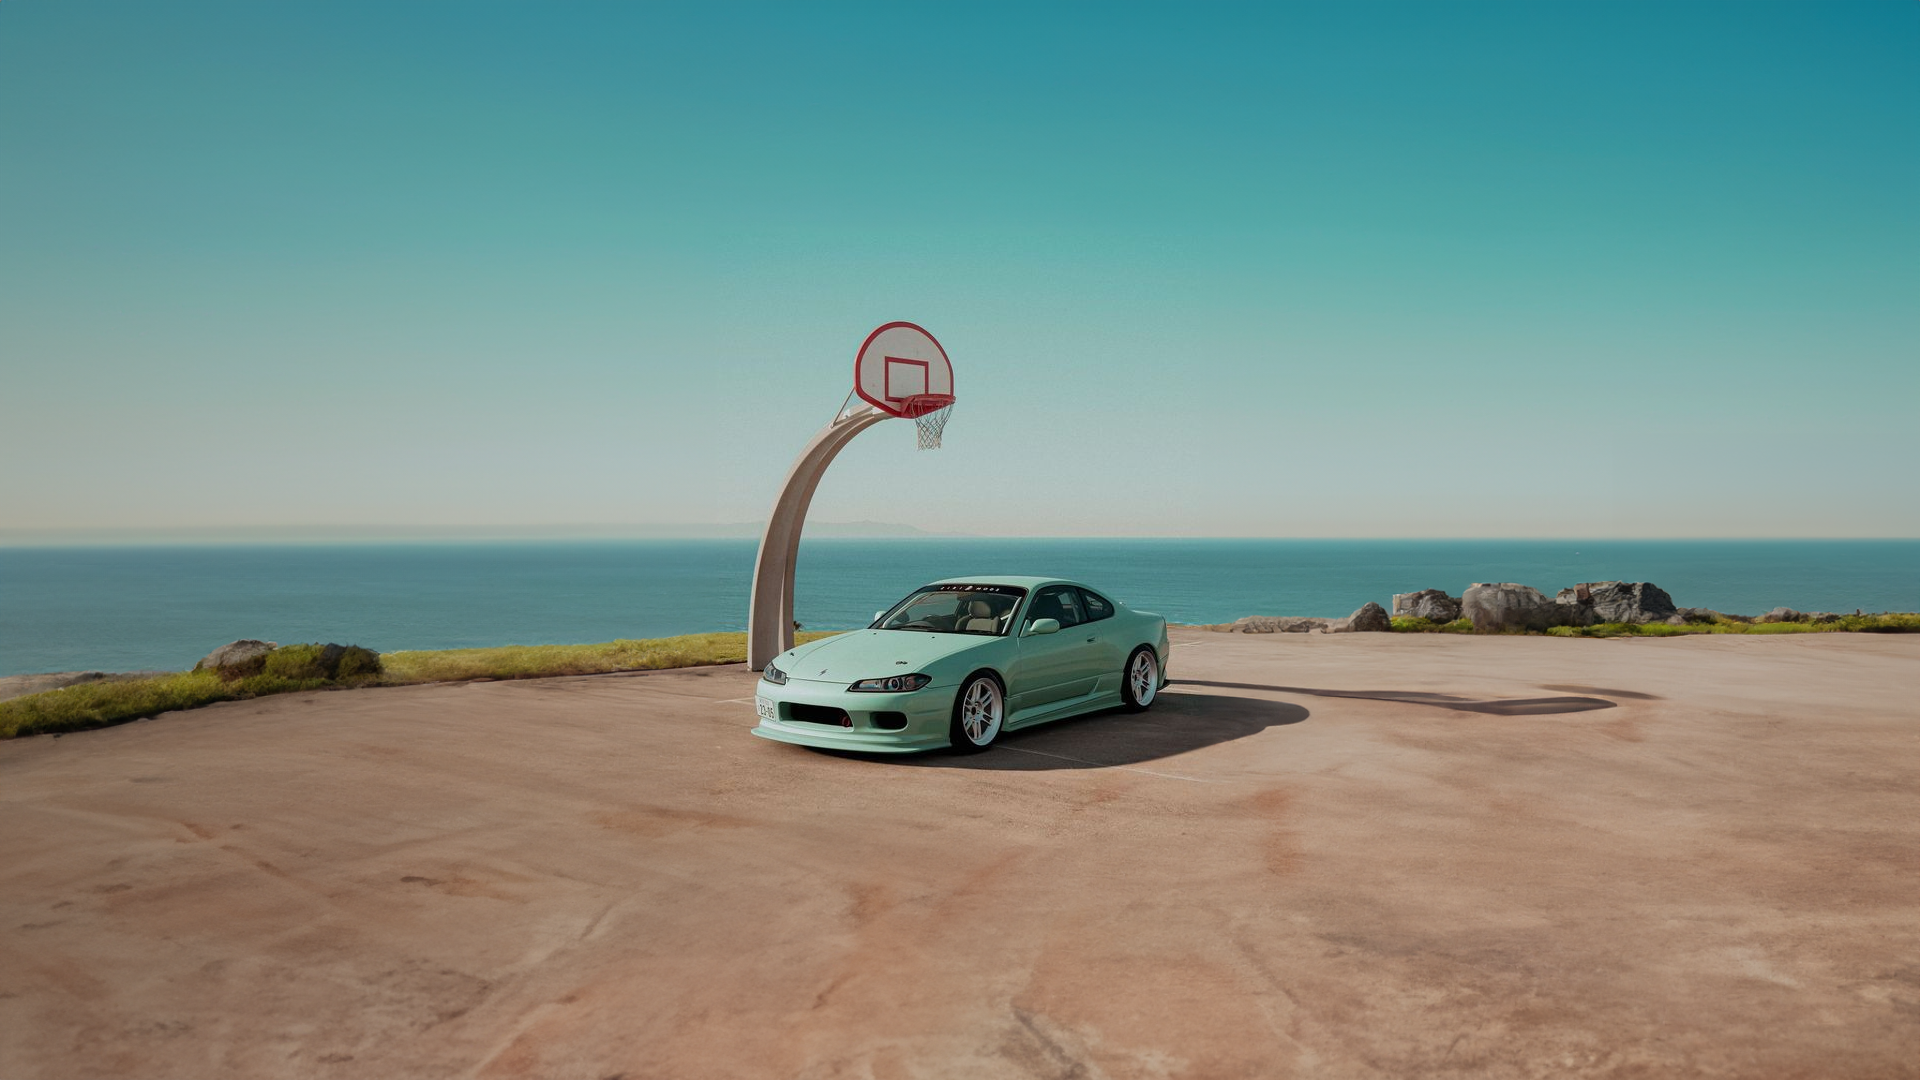 General 1920x1080 car basketball frontal view simple background minimalism Nissan Silvia S15